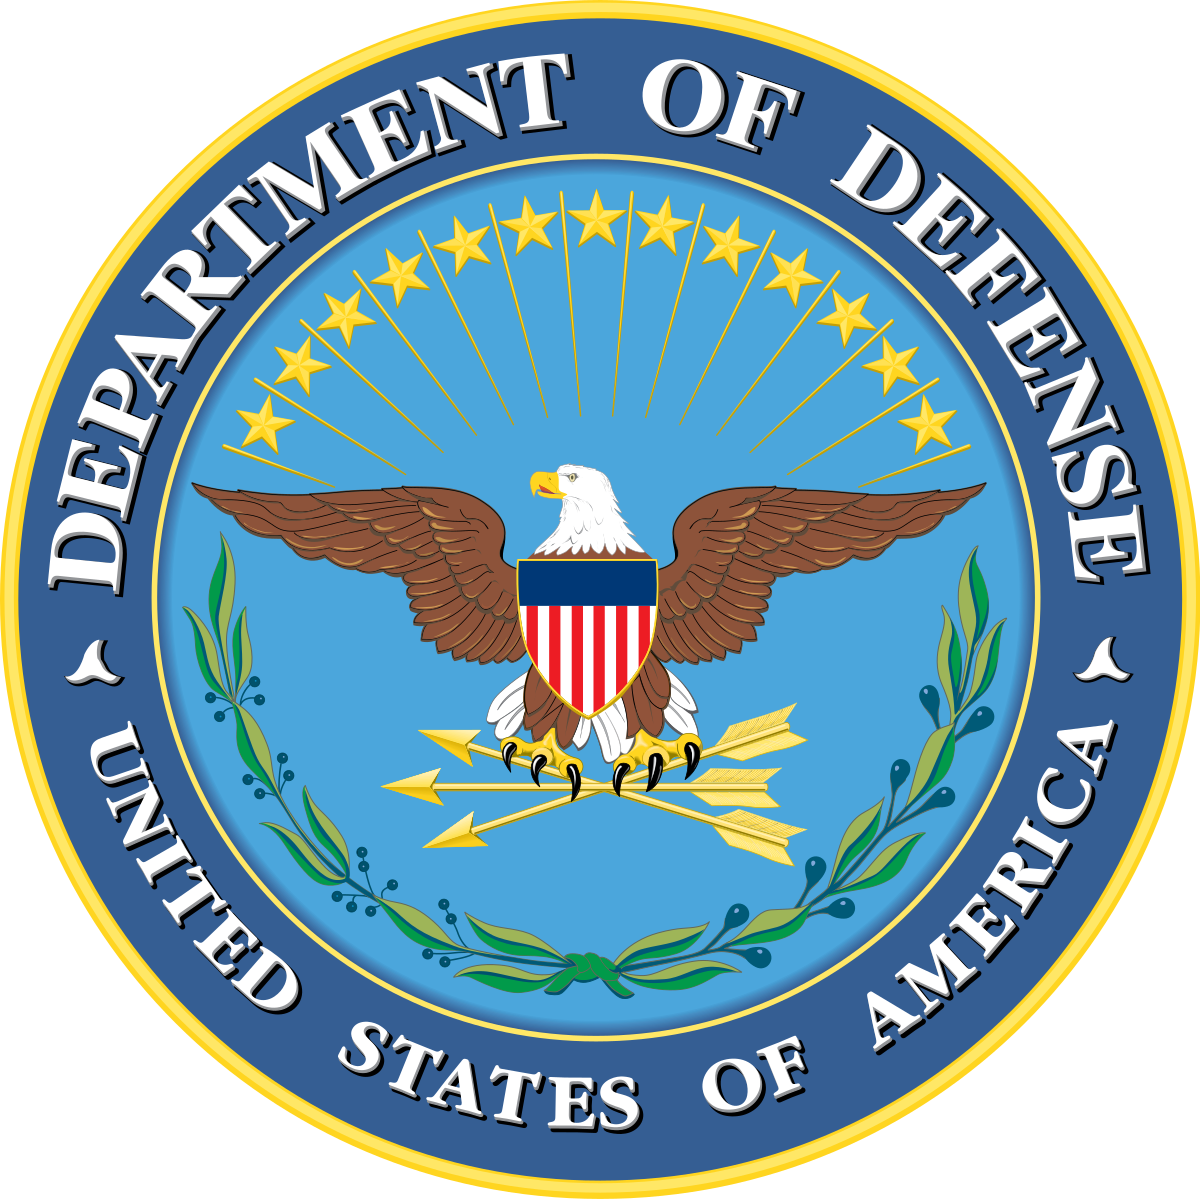 The Department of Defense